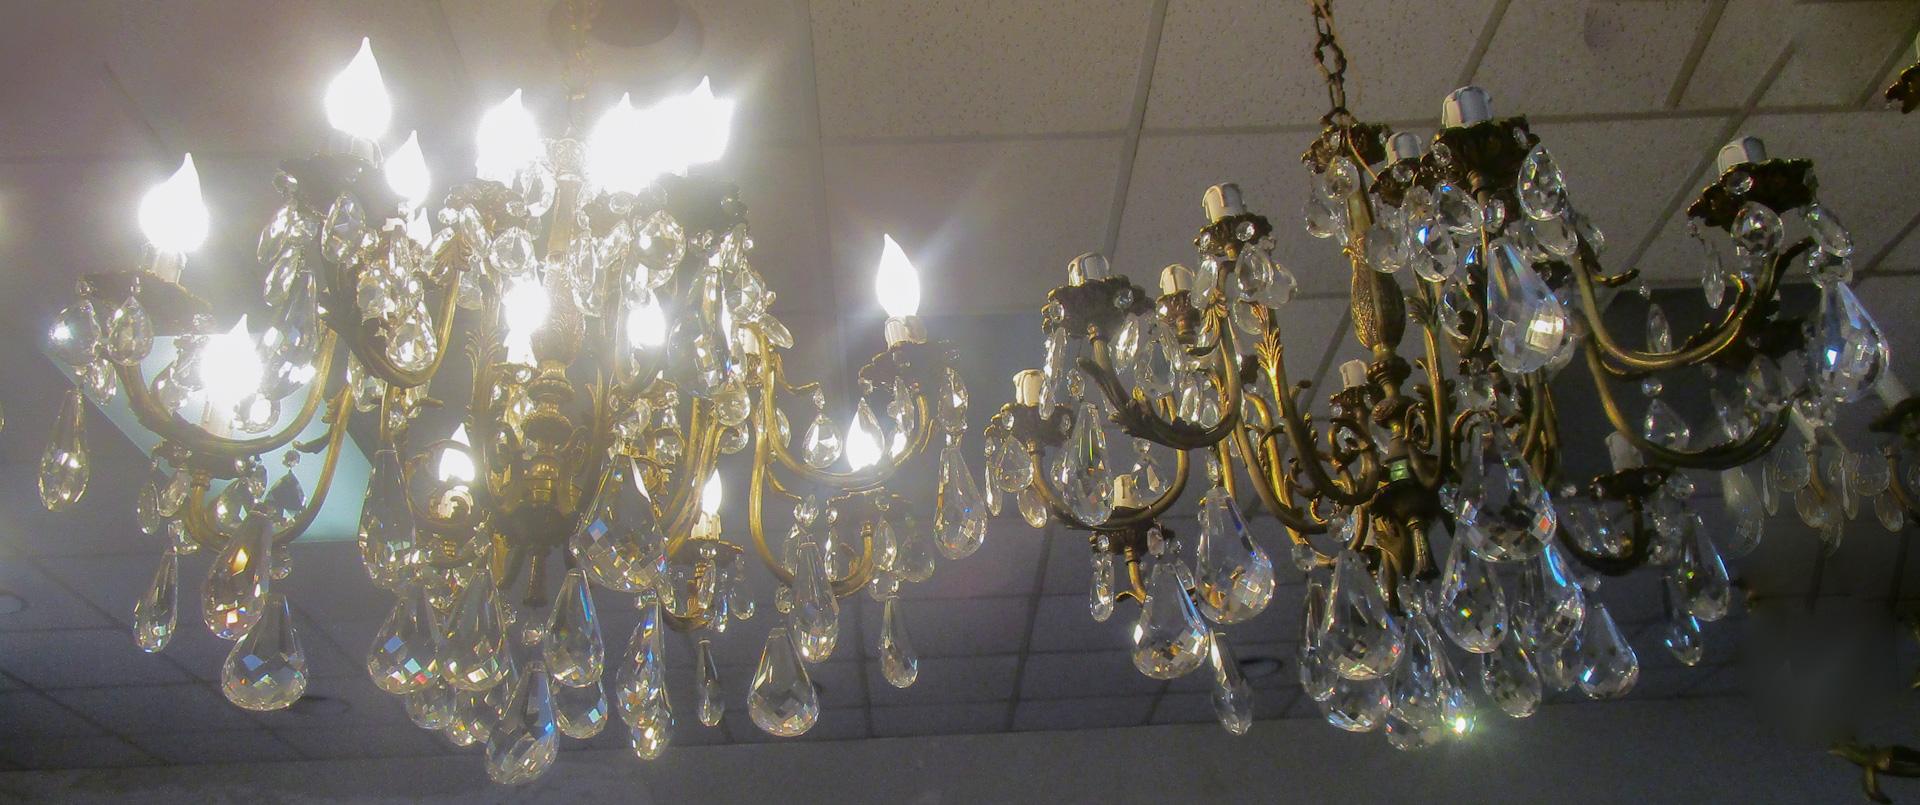 19th C Belle Epoque French Lead Crystal and Brass Sixteen Light Chandelier Pair For Sale 4